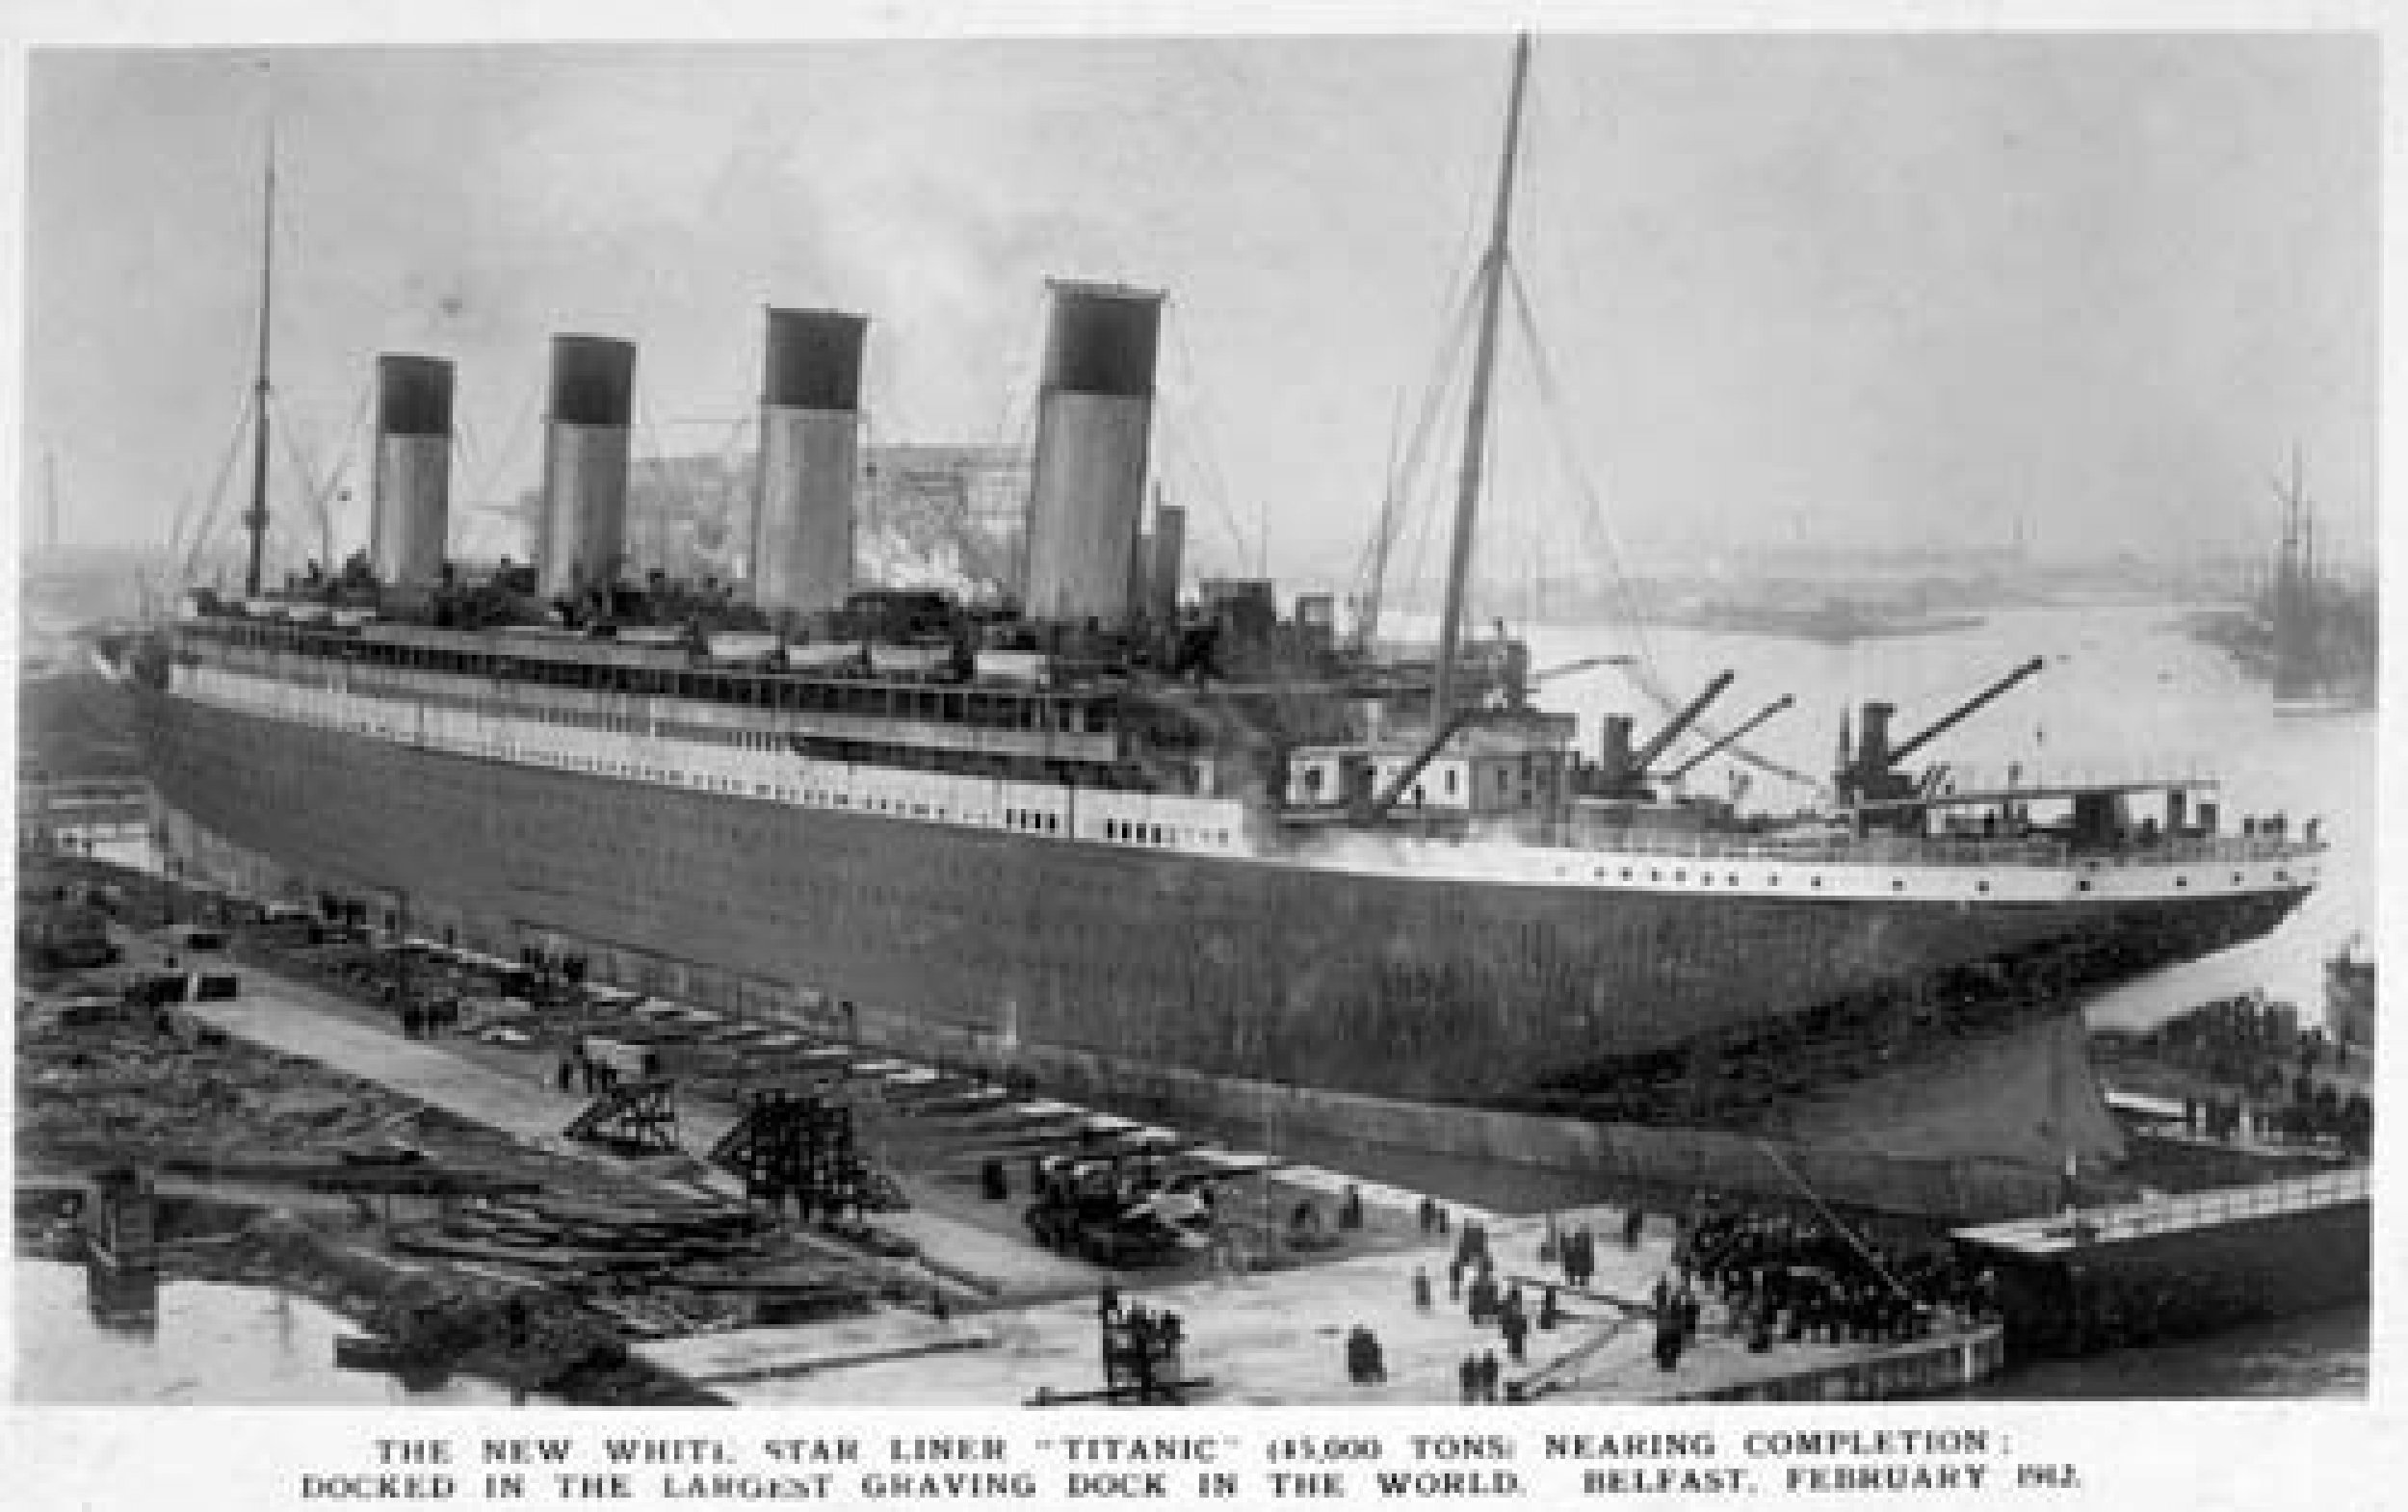 Rare Unseen Images of the RMS Titanic Captured by Father Frank Browne